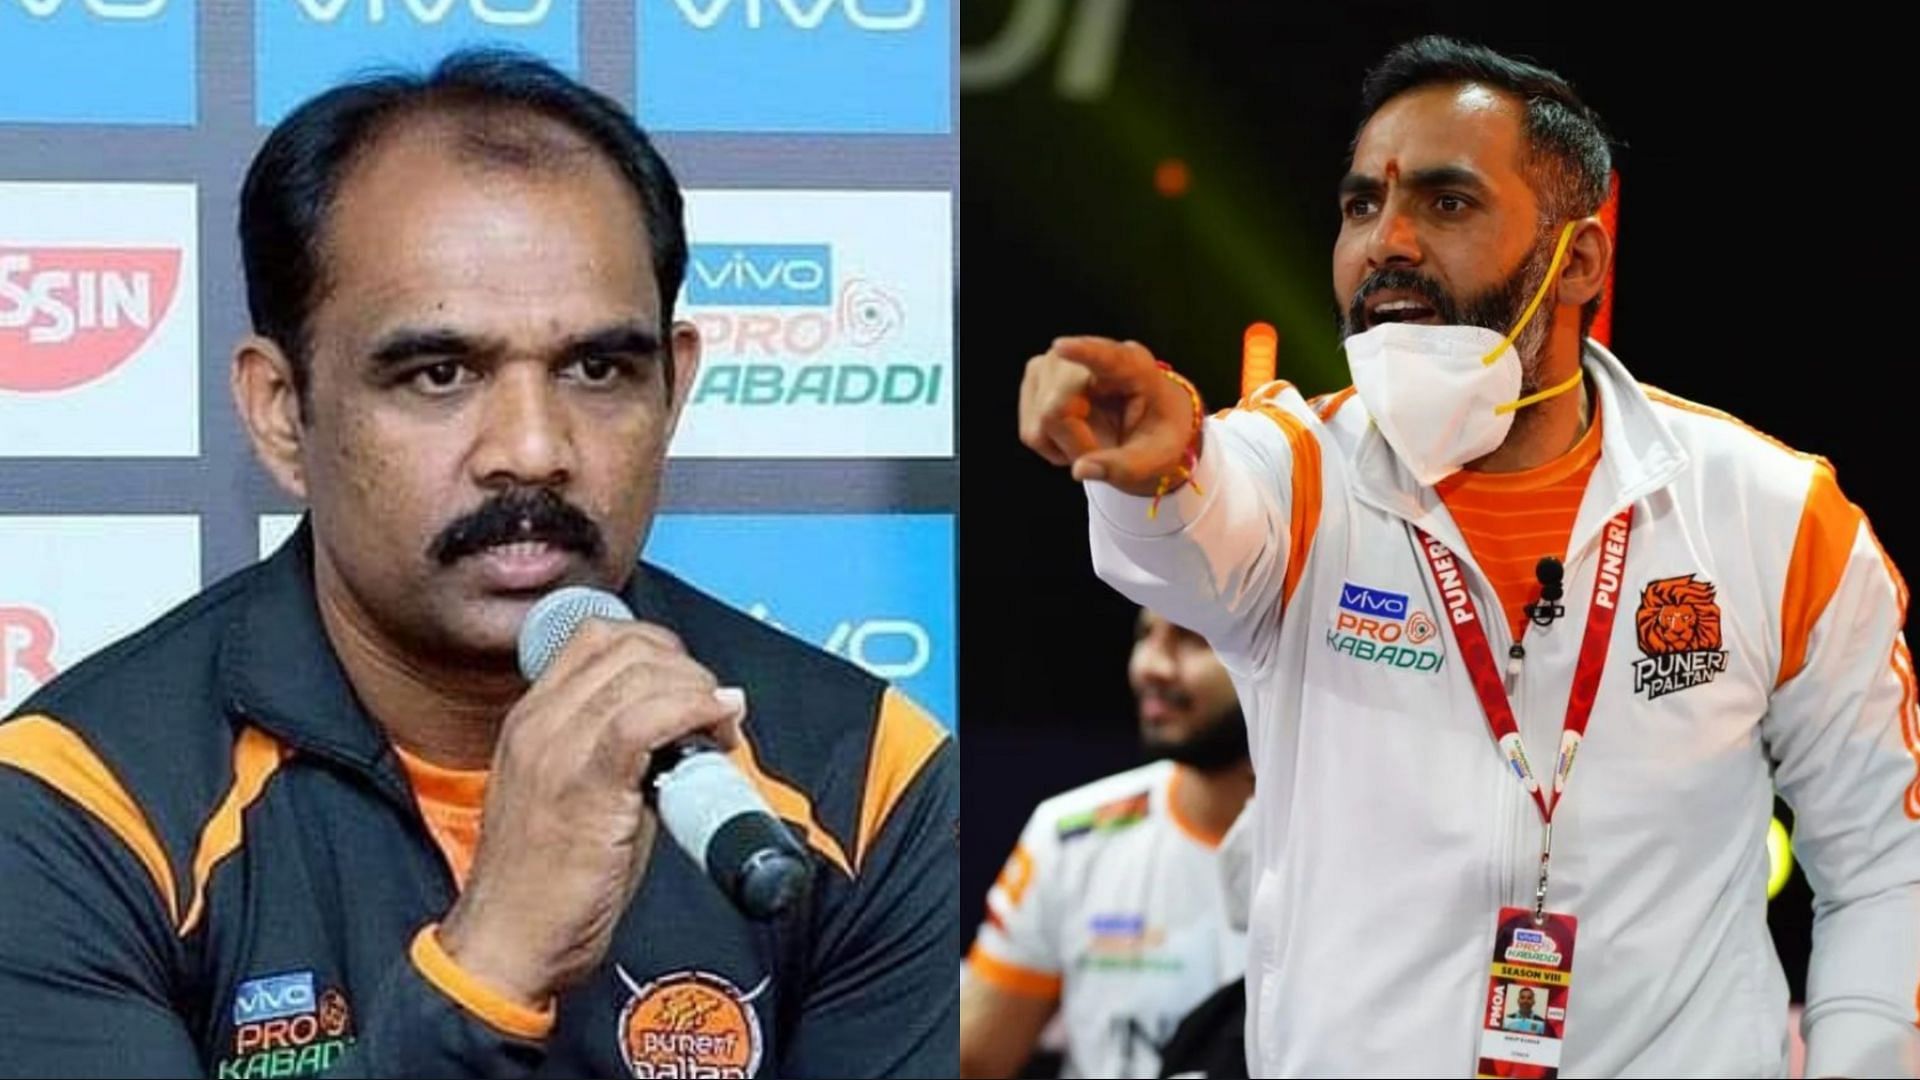 BC Ramesh (L) has replaced Anup Kumar as the head coach of Puneri Paltan (Image Source: Instagram)